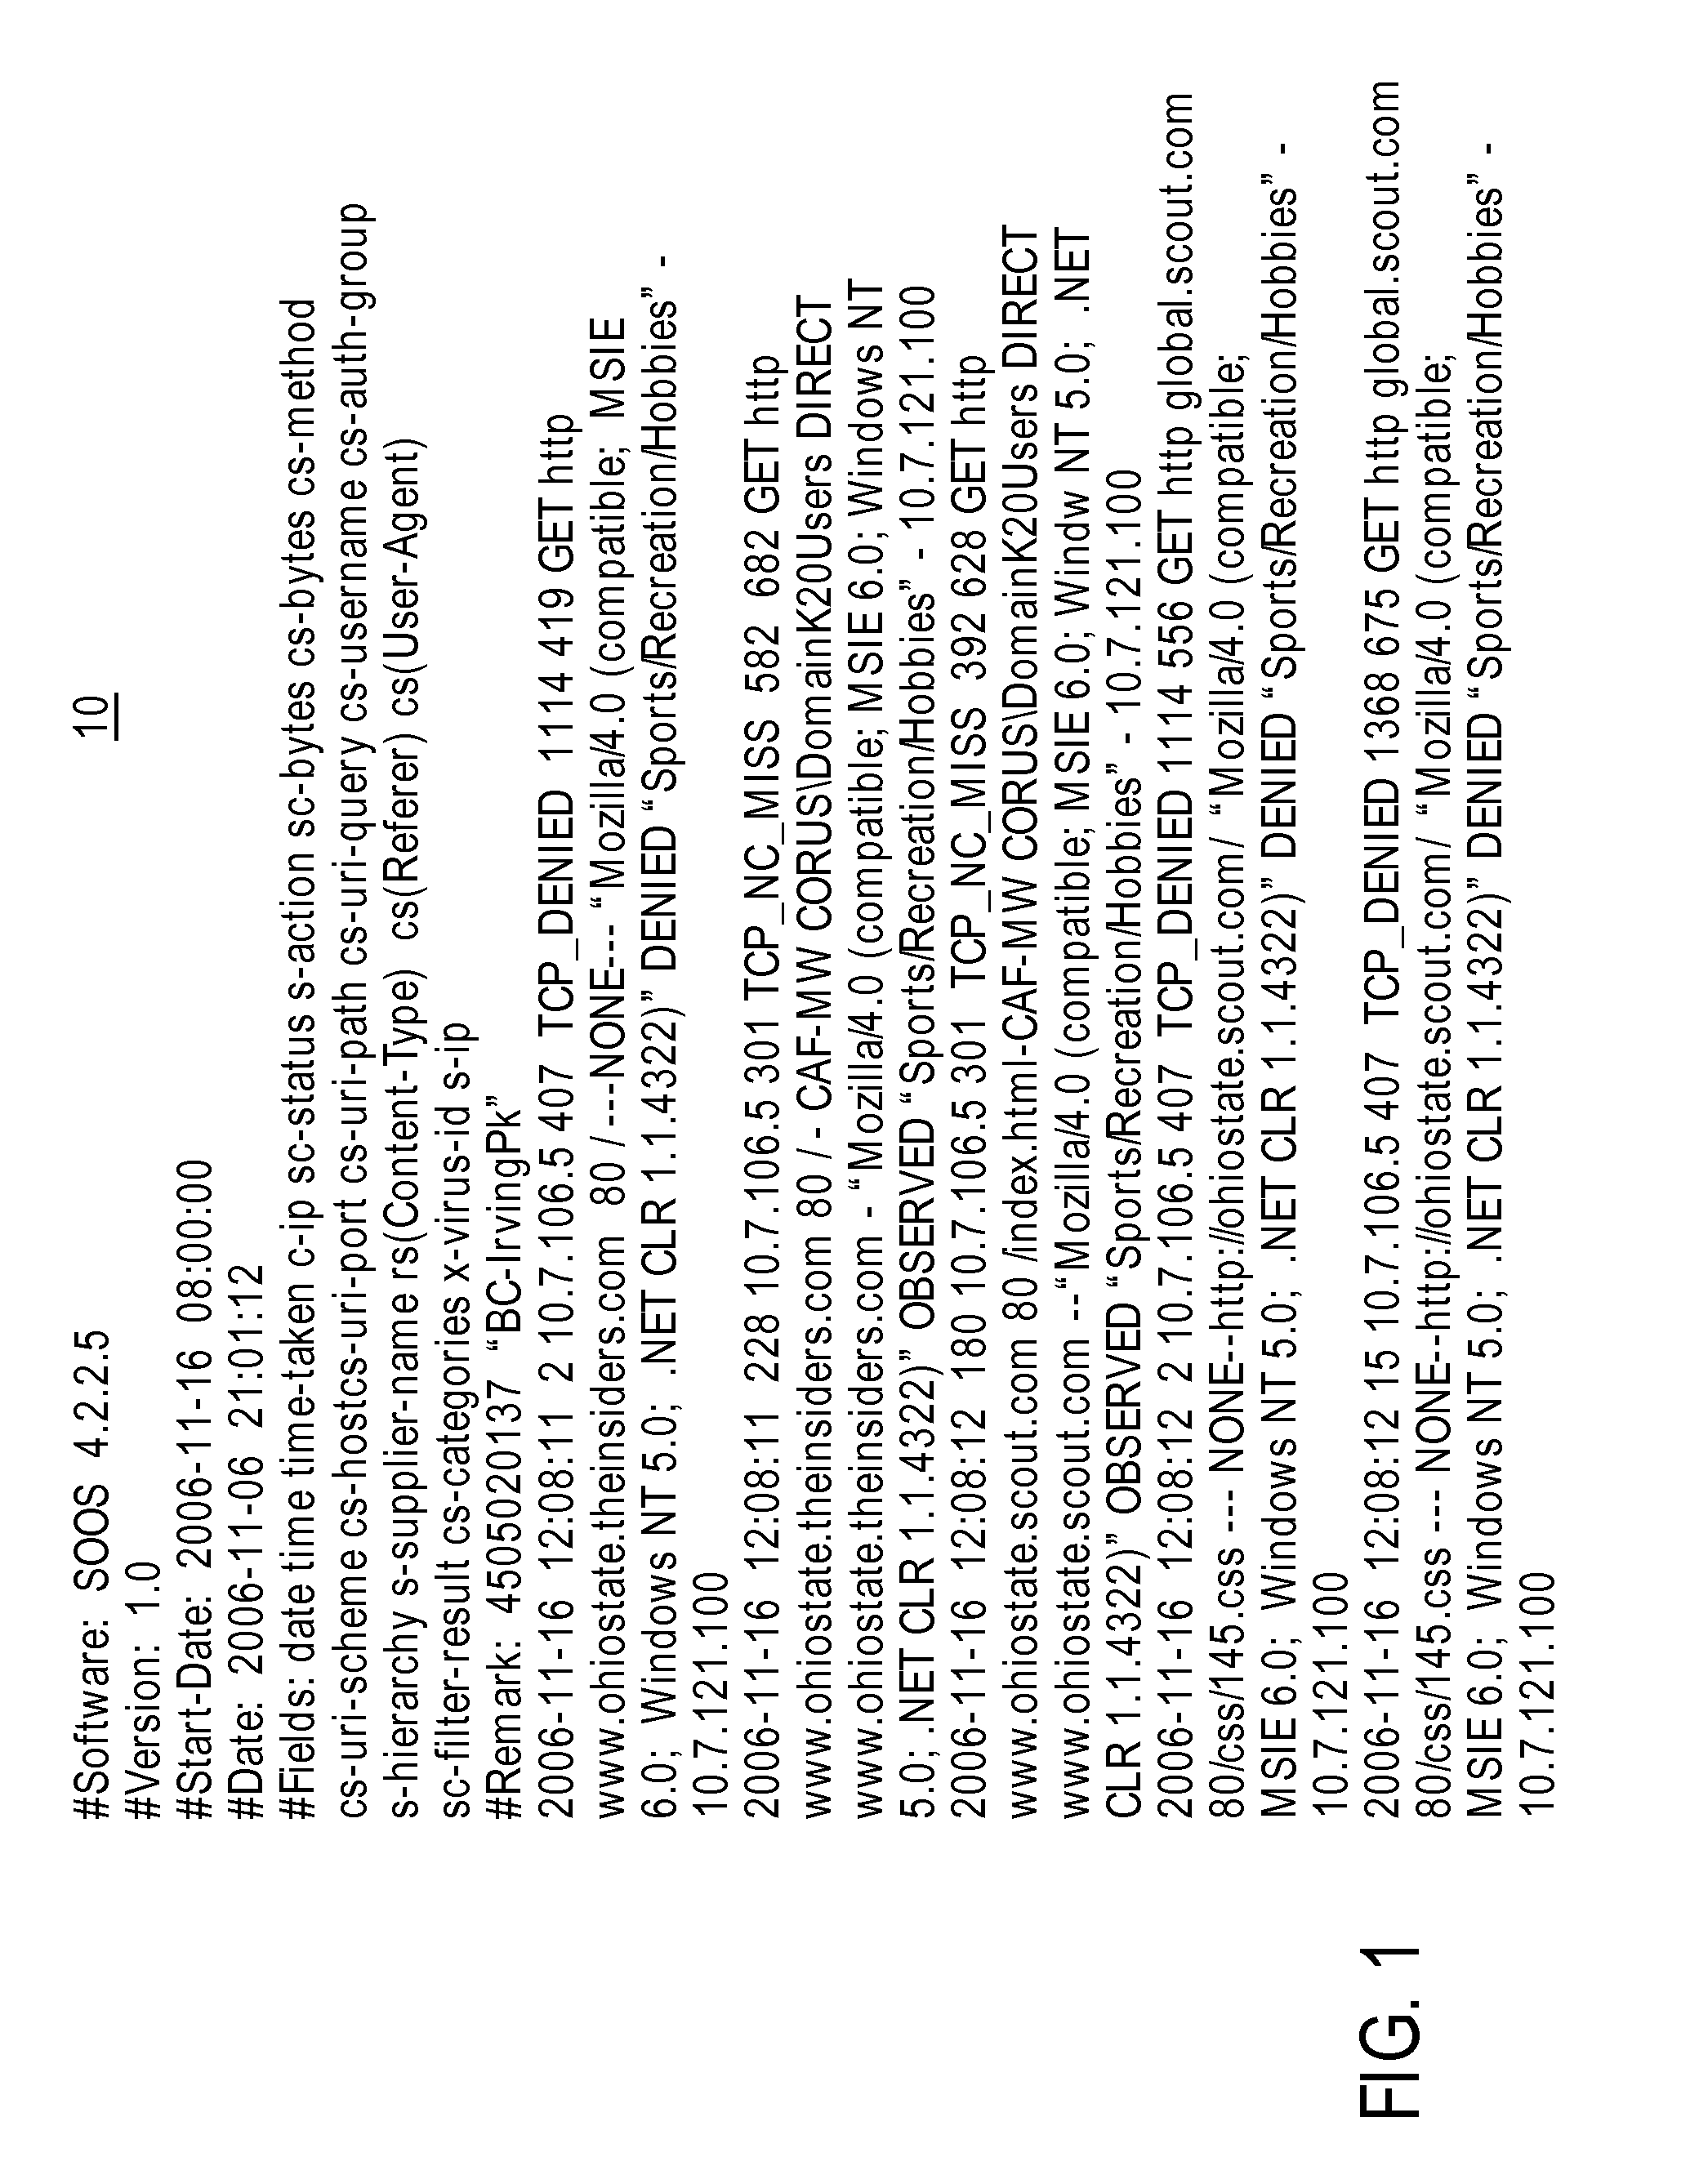 System and method for conducting network analytics